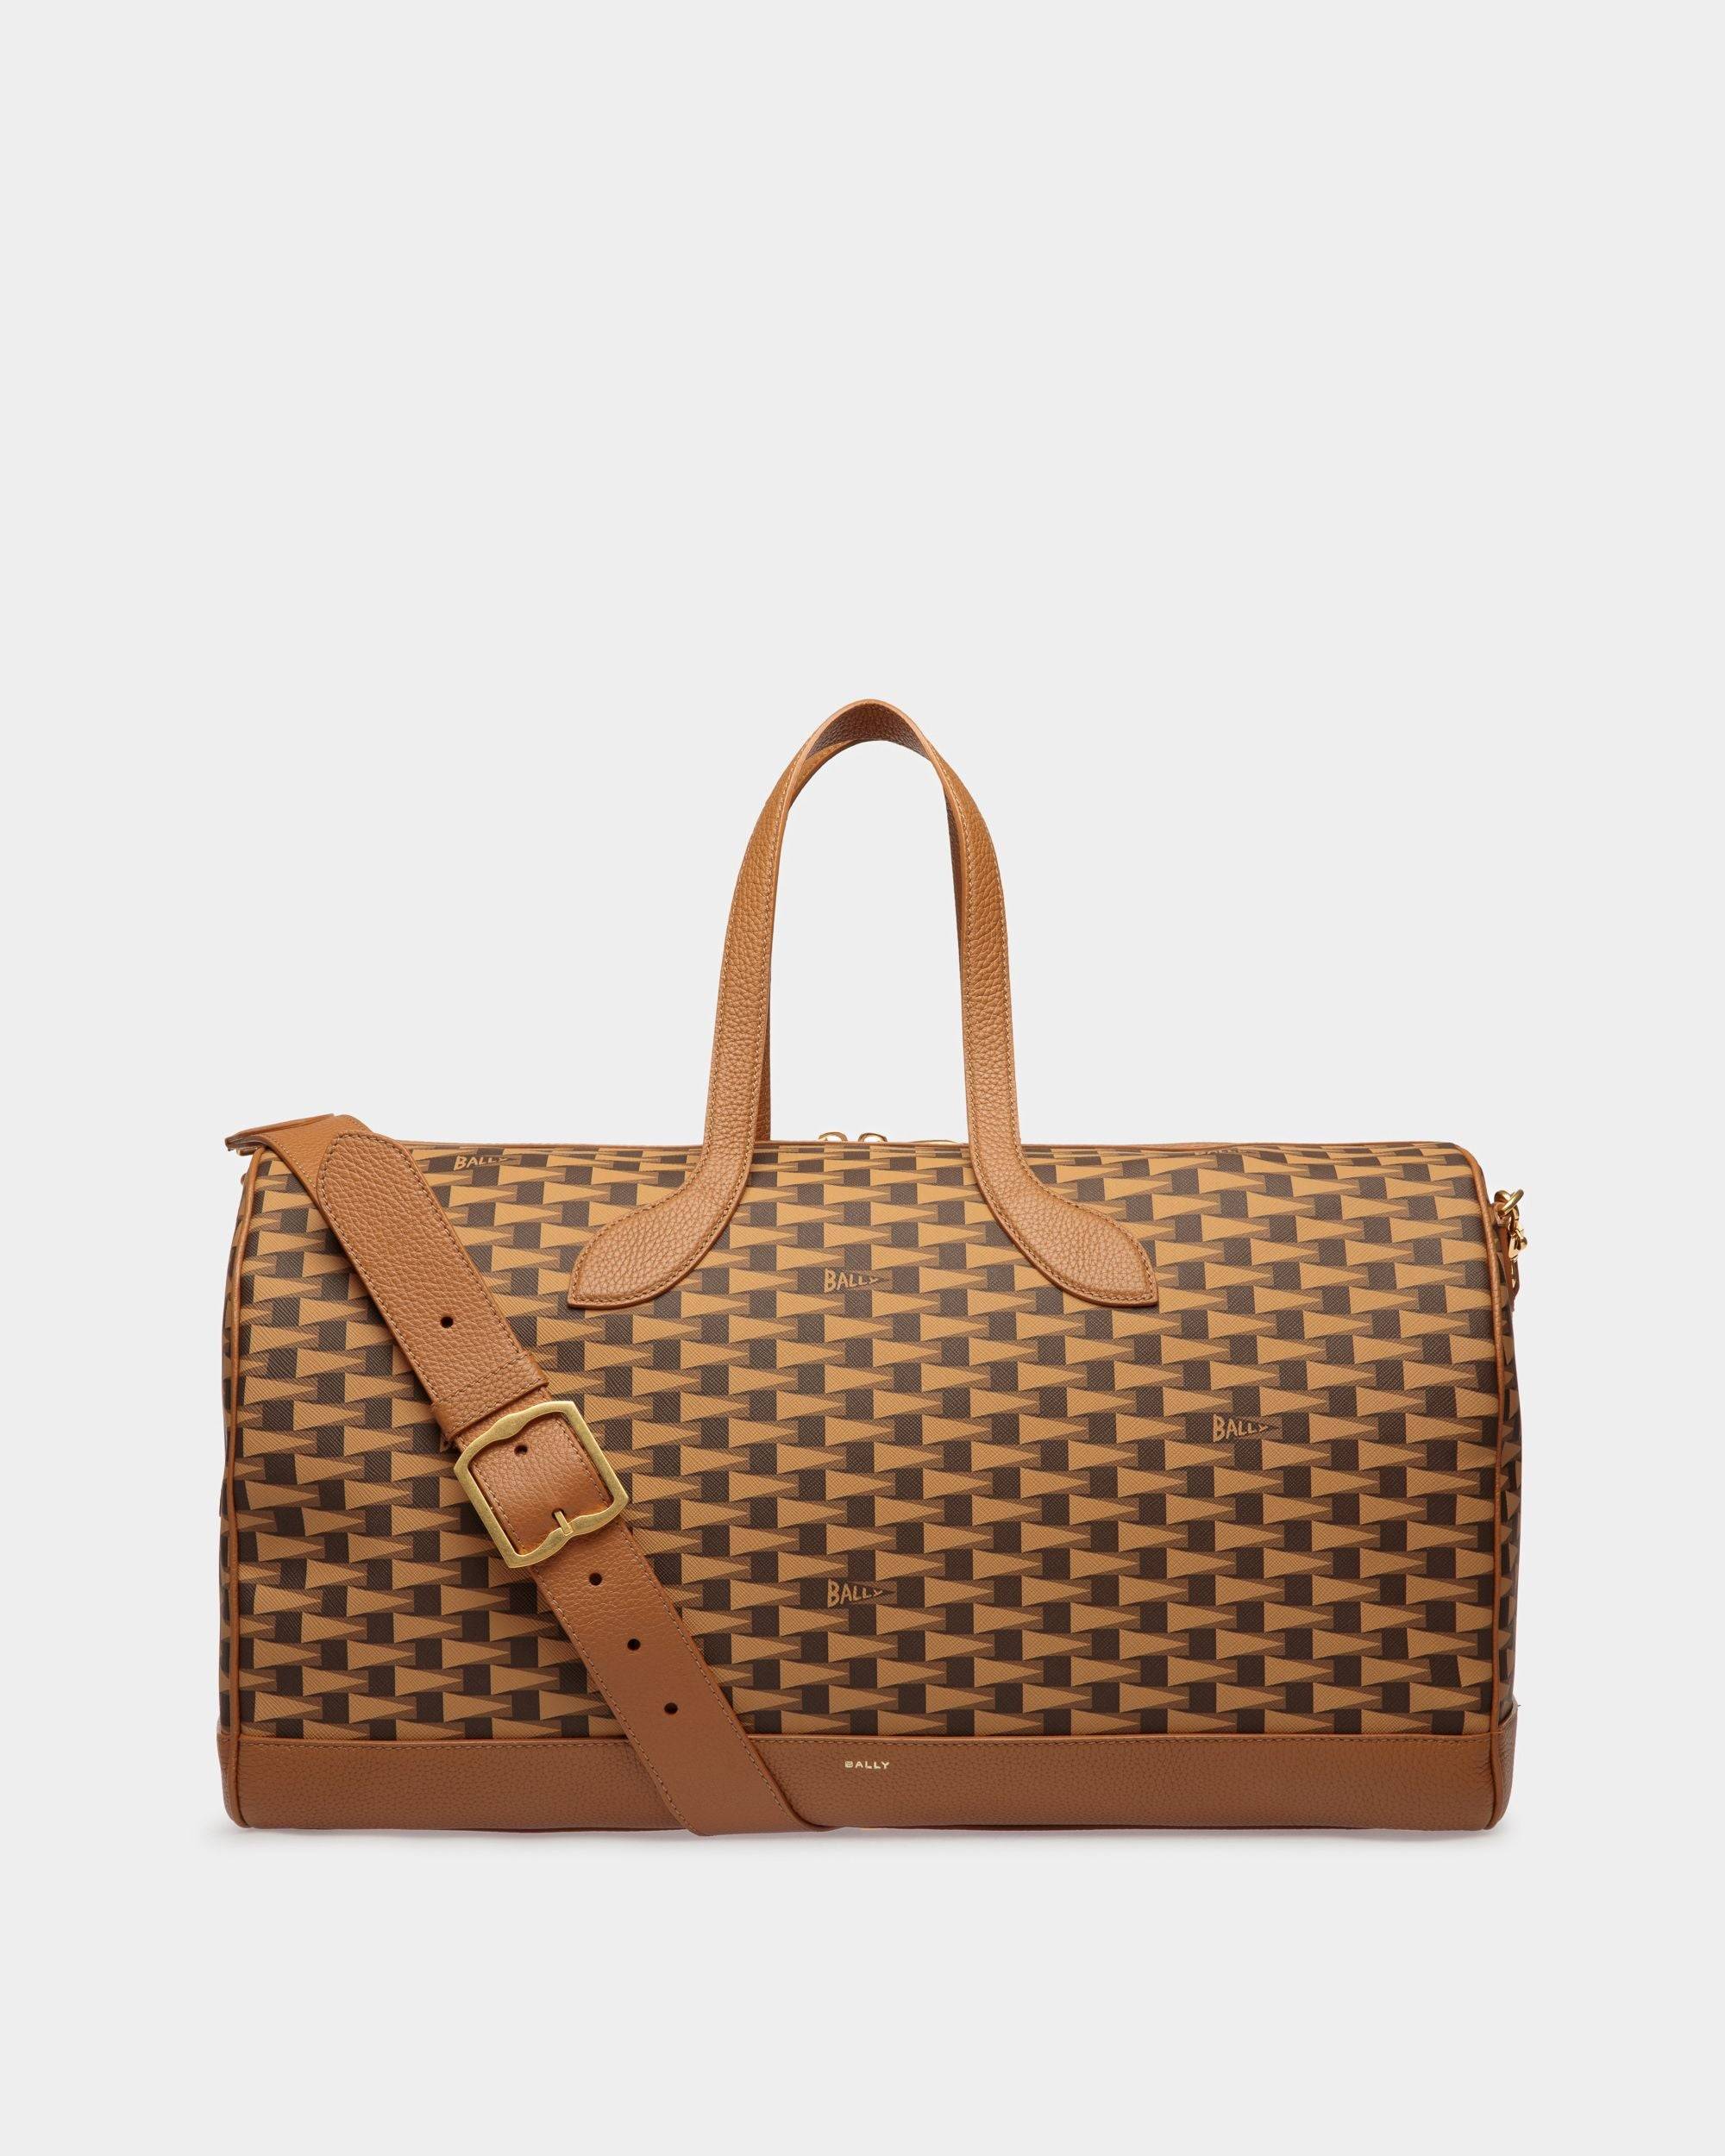 36 Hours Pennant Weekender | Men's Bag | Desert TPU and Leather | Bally | Still Life Front